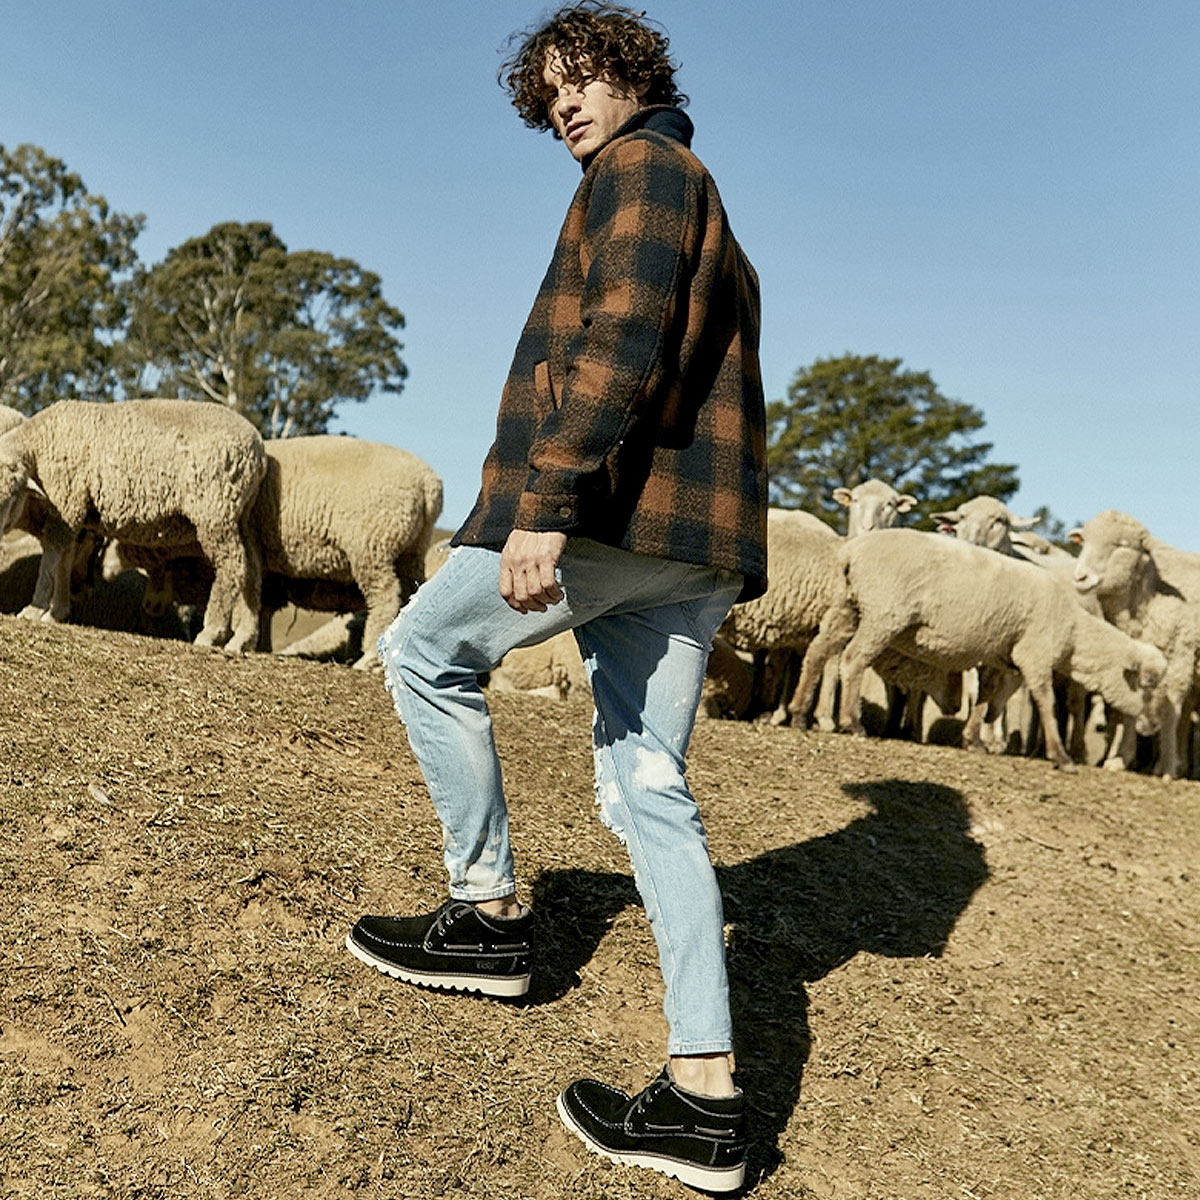 Black UGG Boots with a Flock of Australian Sheep